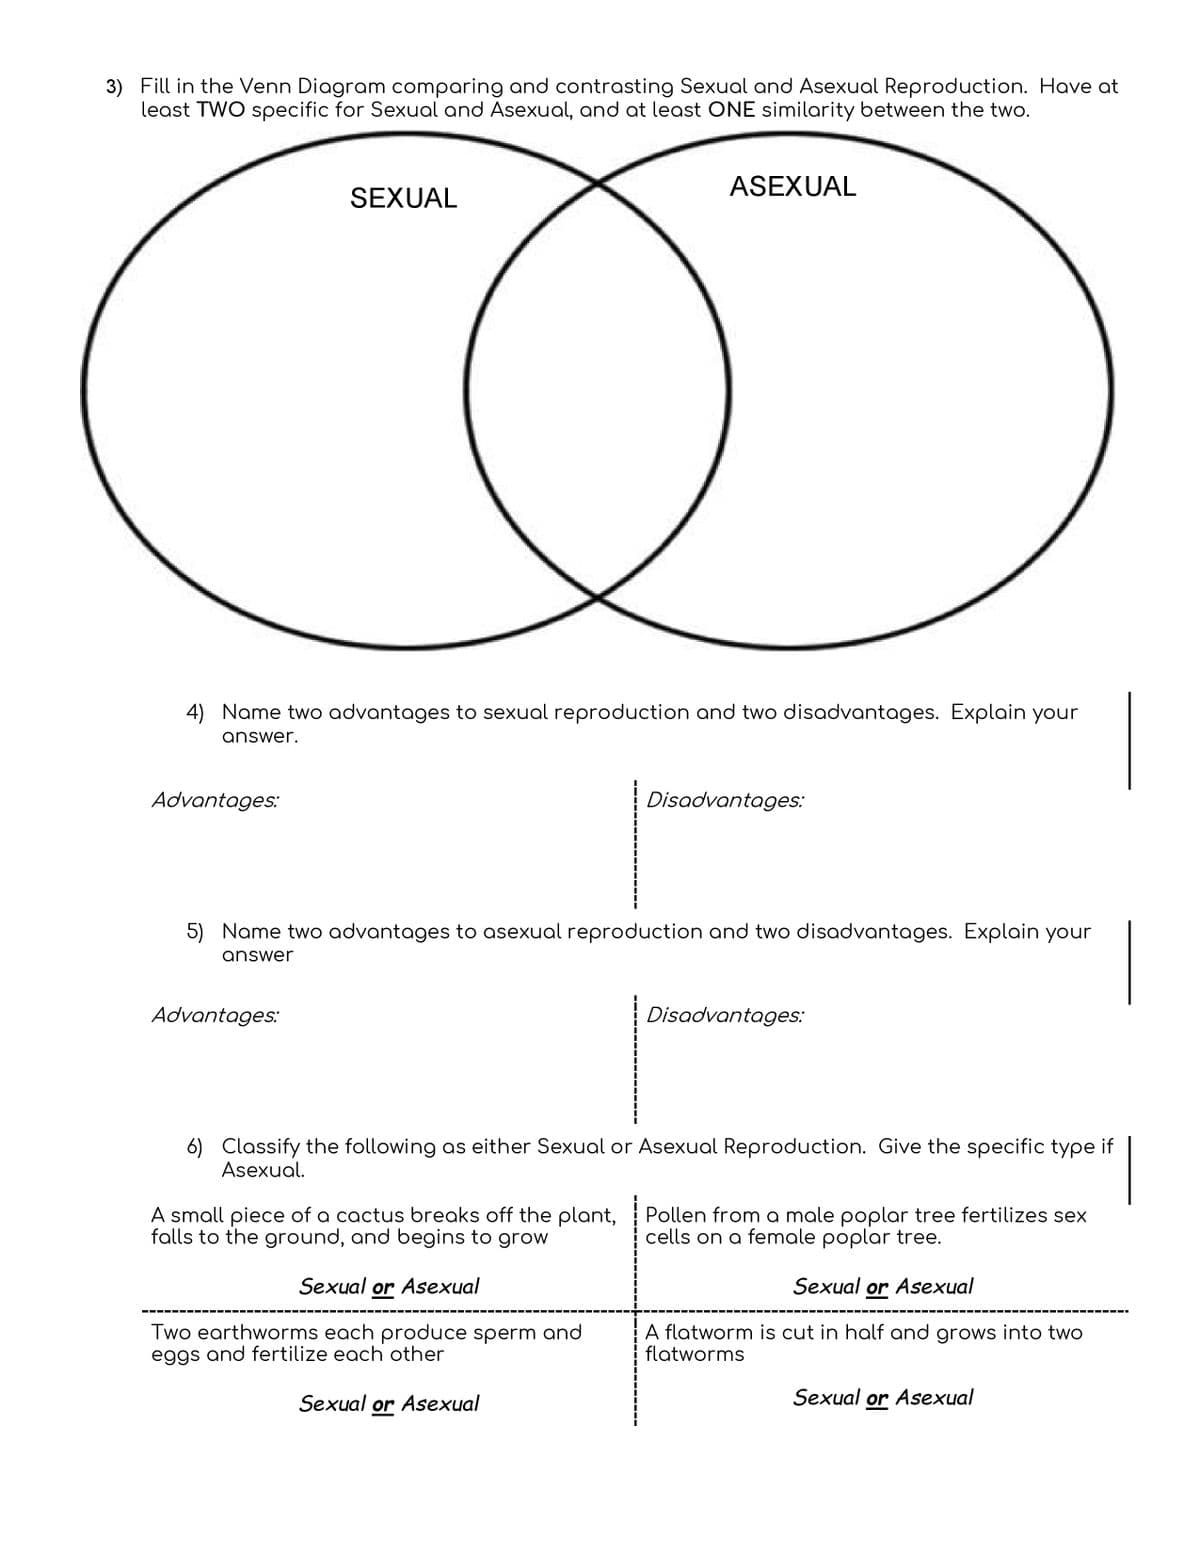 3) Fill in the Venn Diagram comparing and contrasting Sexual and Asexual Reproduction. Have at
least TWO specific for Sexual and Asexual, and at least ONE similarity between the two.
ASEXUAL
SEXUAL
4) Name two advantages to sexual reproduction and two disadvantages. Explain your
answer.
Advantages:
Disadvantages:
5) Name two advantages to asexual reproduction and two disadvantages. Explain your
answer
Advantages:
Disadvantages:
6) Classify the following as either Sexual or Asexual Reproduction. Give the specific type if
Asexual.
A small piece of a cactus breaks off the plant,
falls to the ground, and begins to grow
Pollen from a male poplar tree fertilizes sex
cells on a female poplar tree.
Sexual or Asexual
Sexual or Asexual
Two earthworms each produce sperm and
eggs and fertilize each other
A flatworm is cut in half and grows into two
flatworms
Sexual or Asexual
Sexual or Asexual
